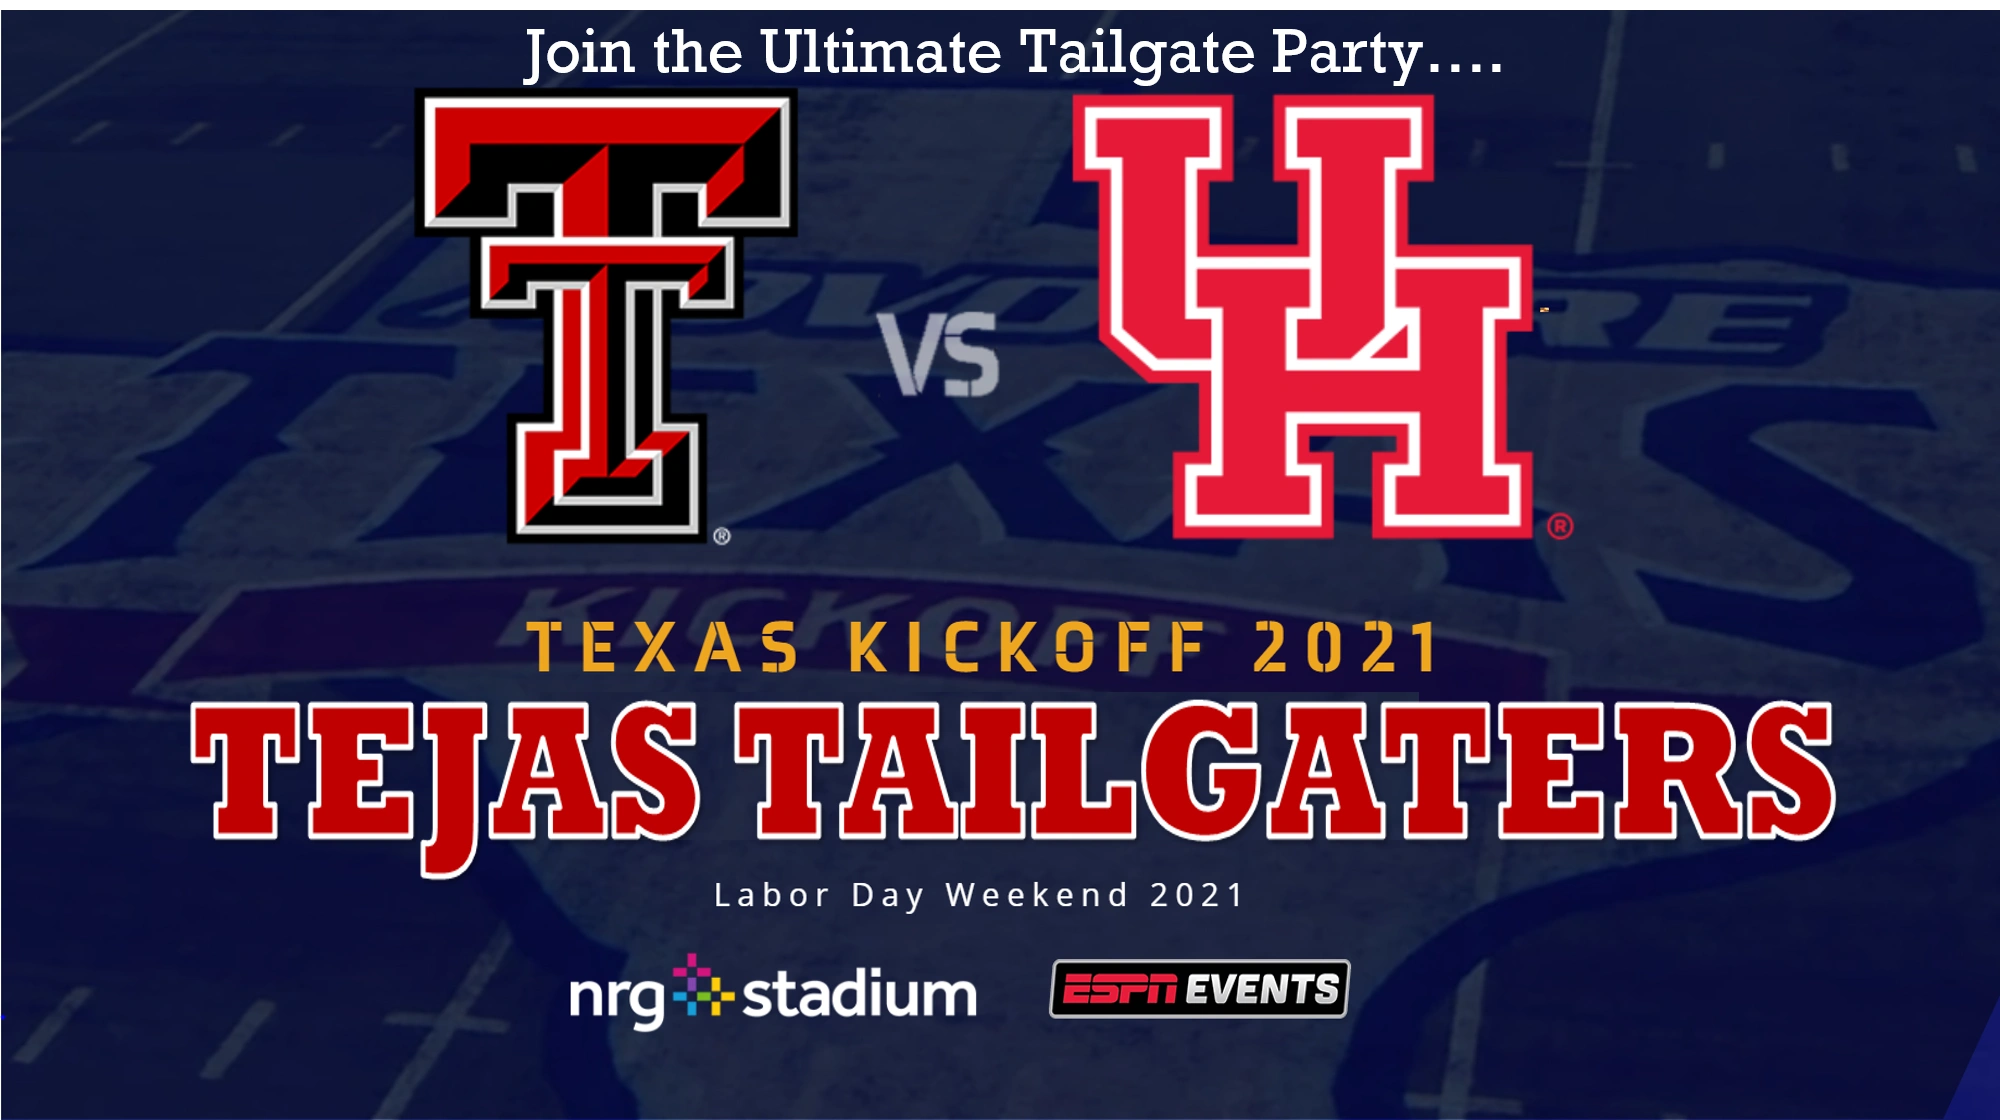 Tejas Tailgaters